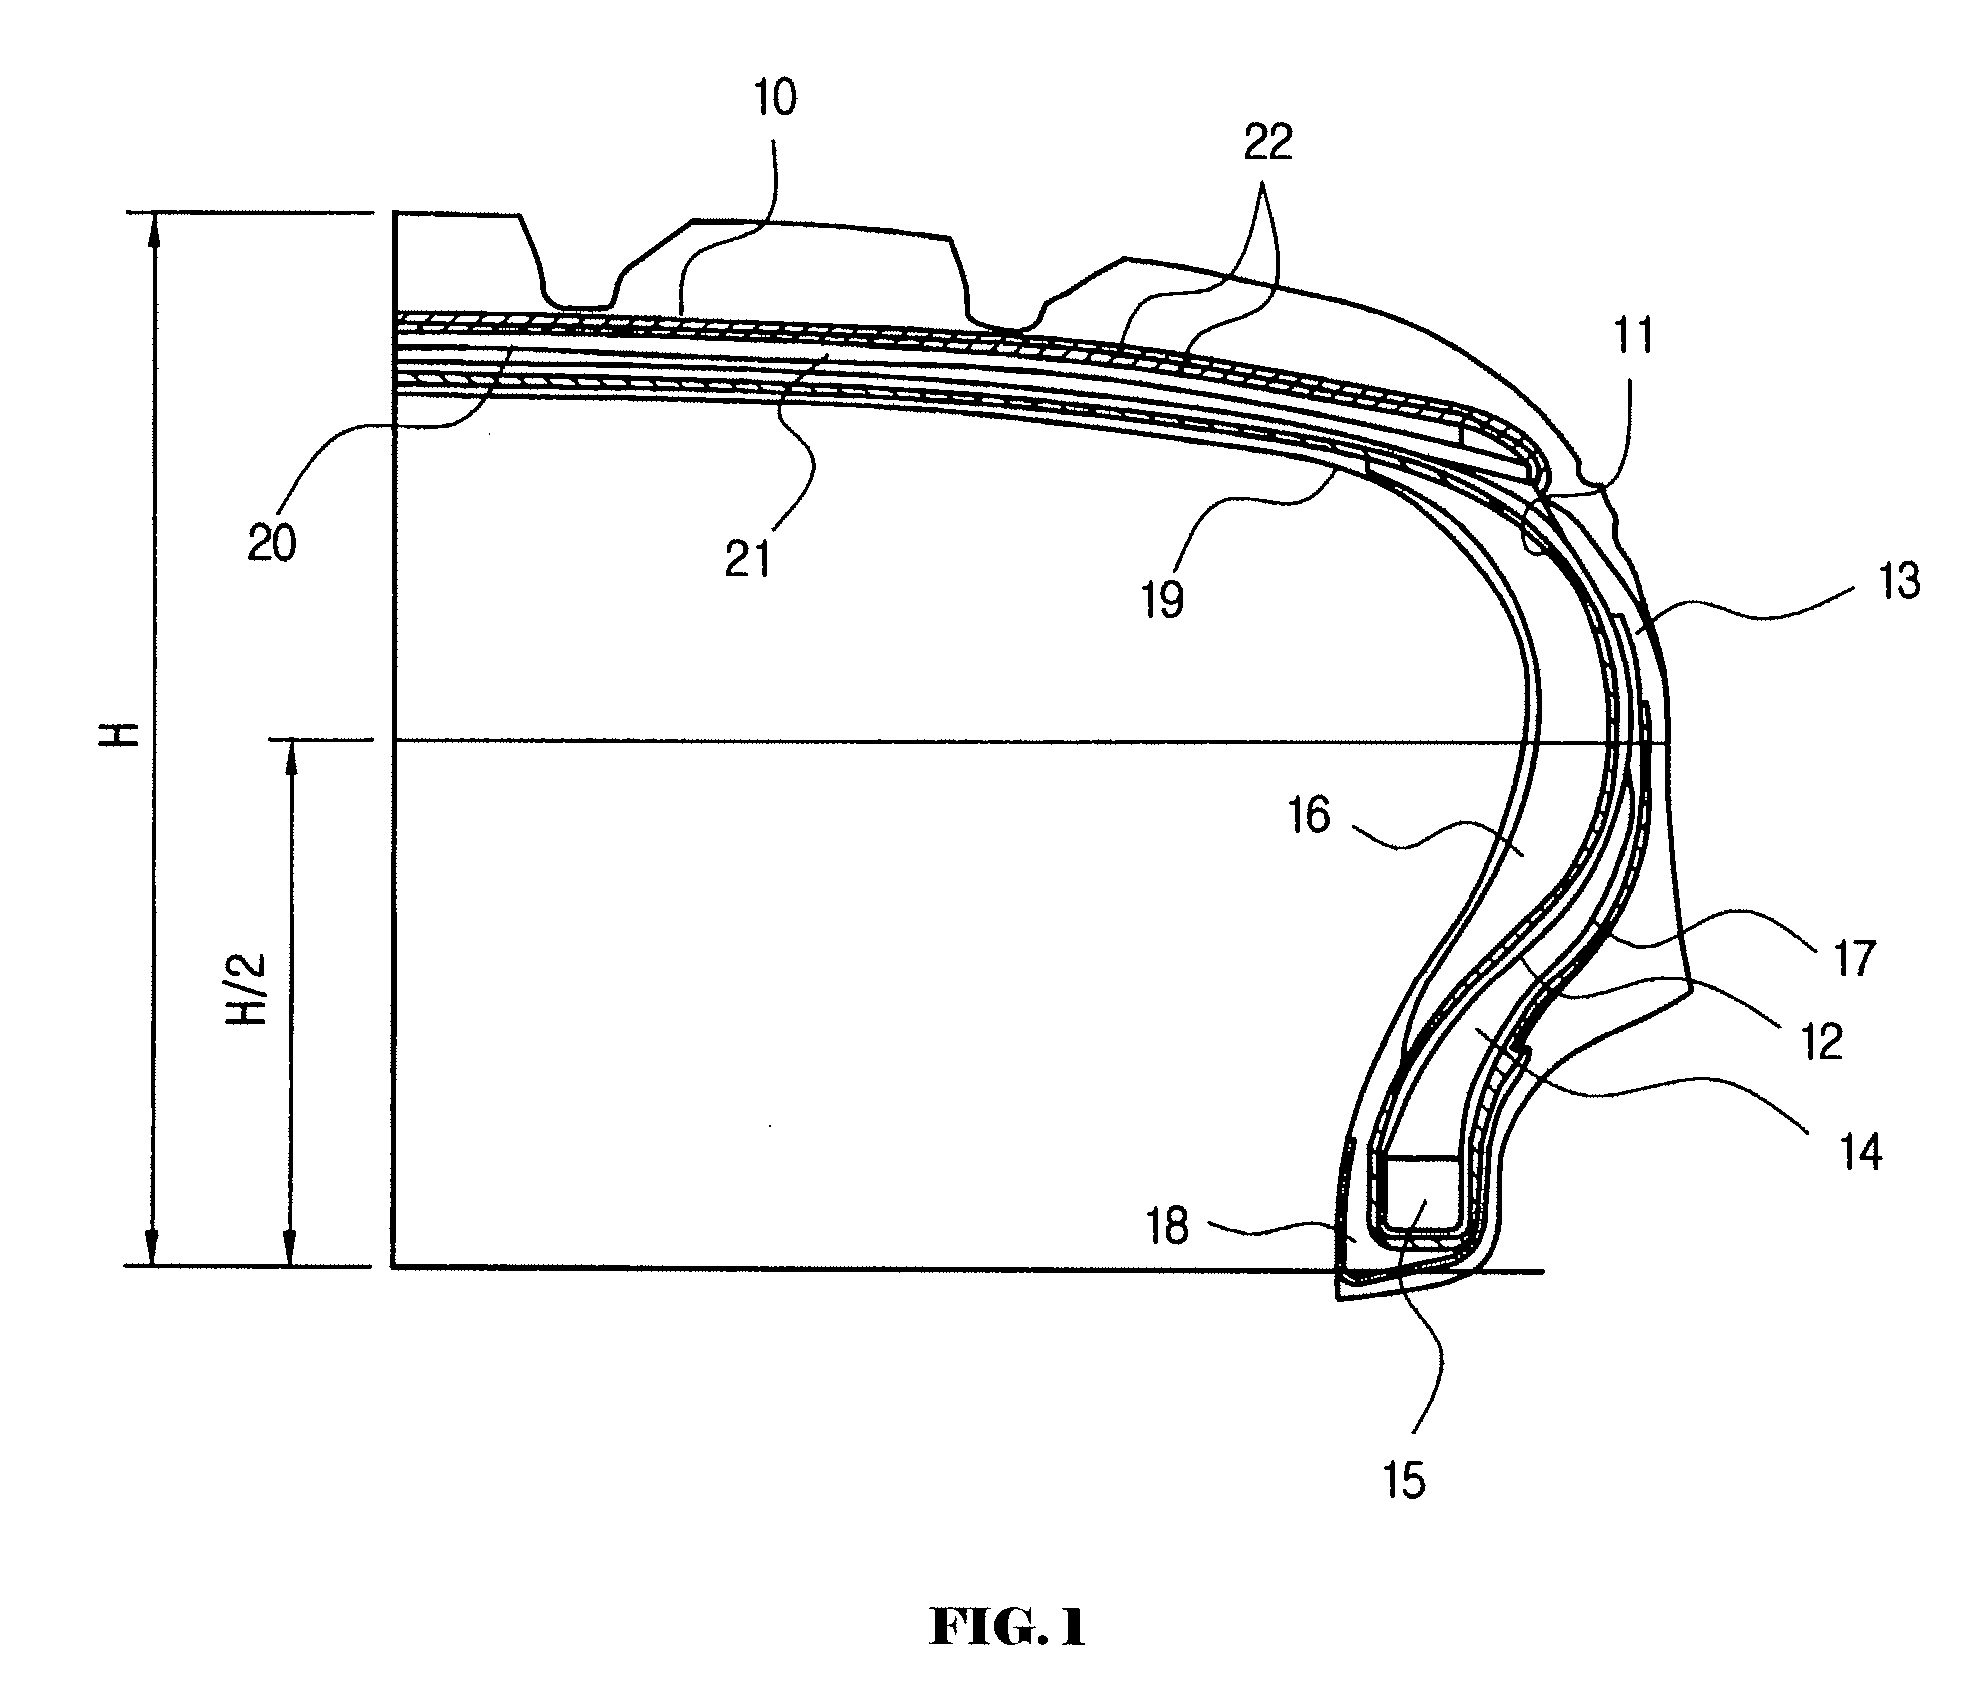 Self-supporting type pneumatic run-flat tire, and insert and bead rubber composition for run-flat capability